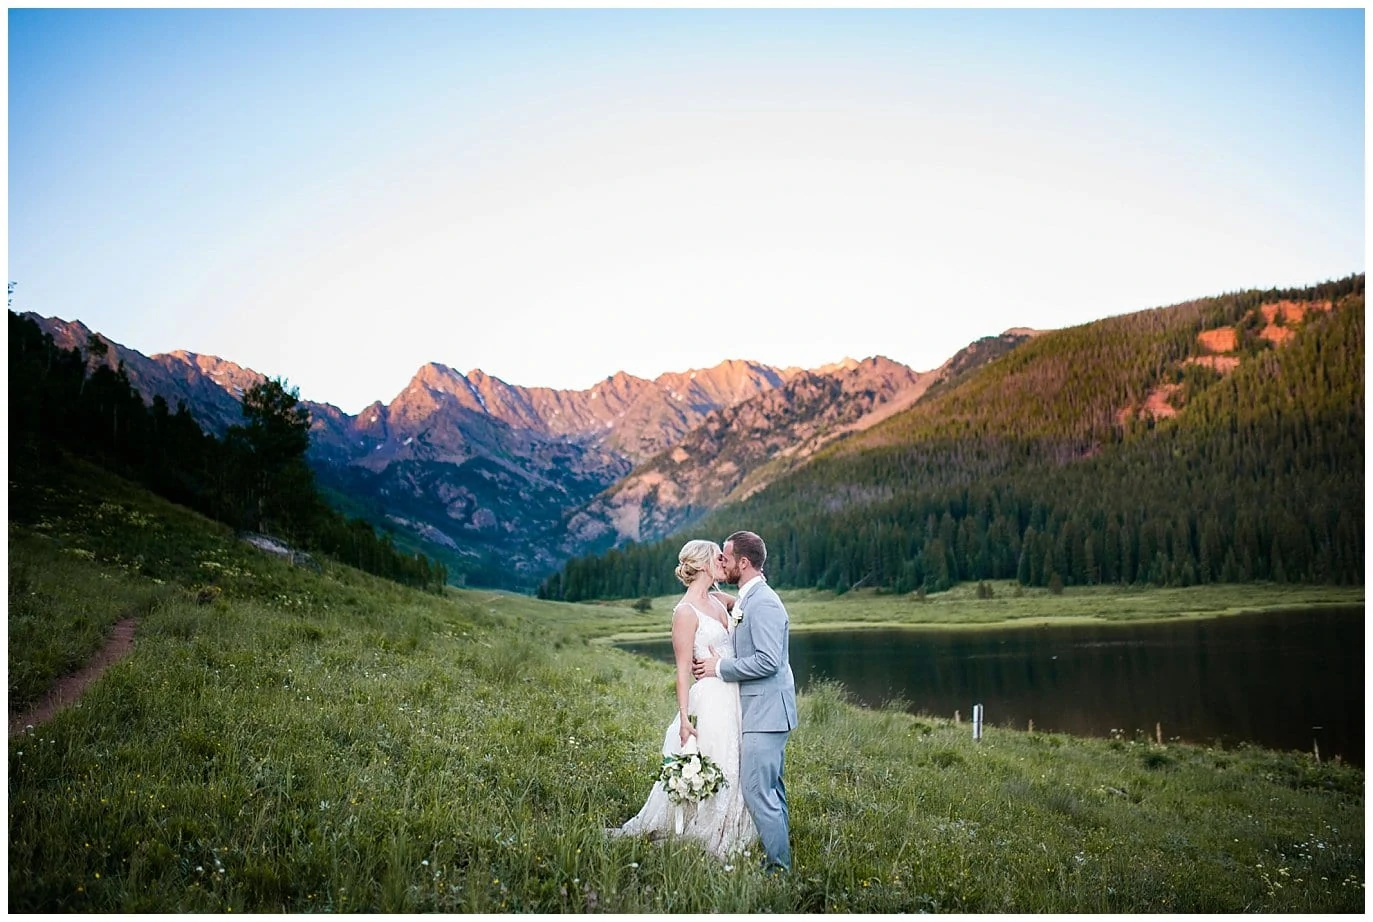 sunset photos by lake at Piney River Ranch wedding by Beaver Creek wedding photographer Jennie Crate, Photographer